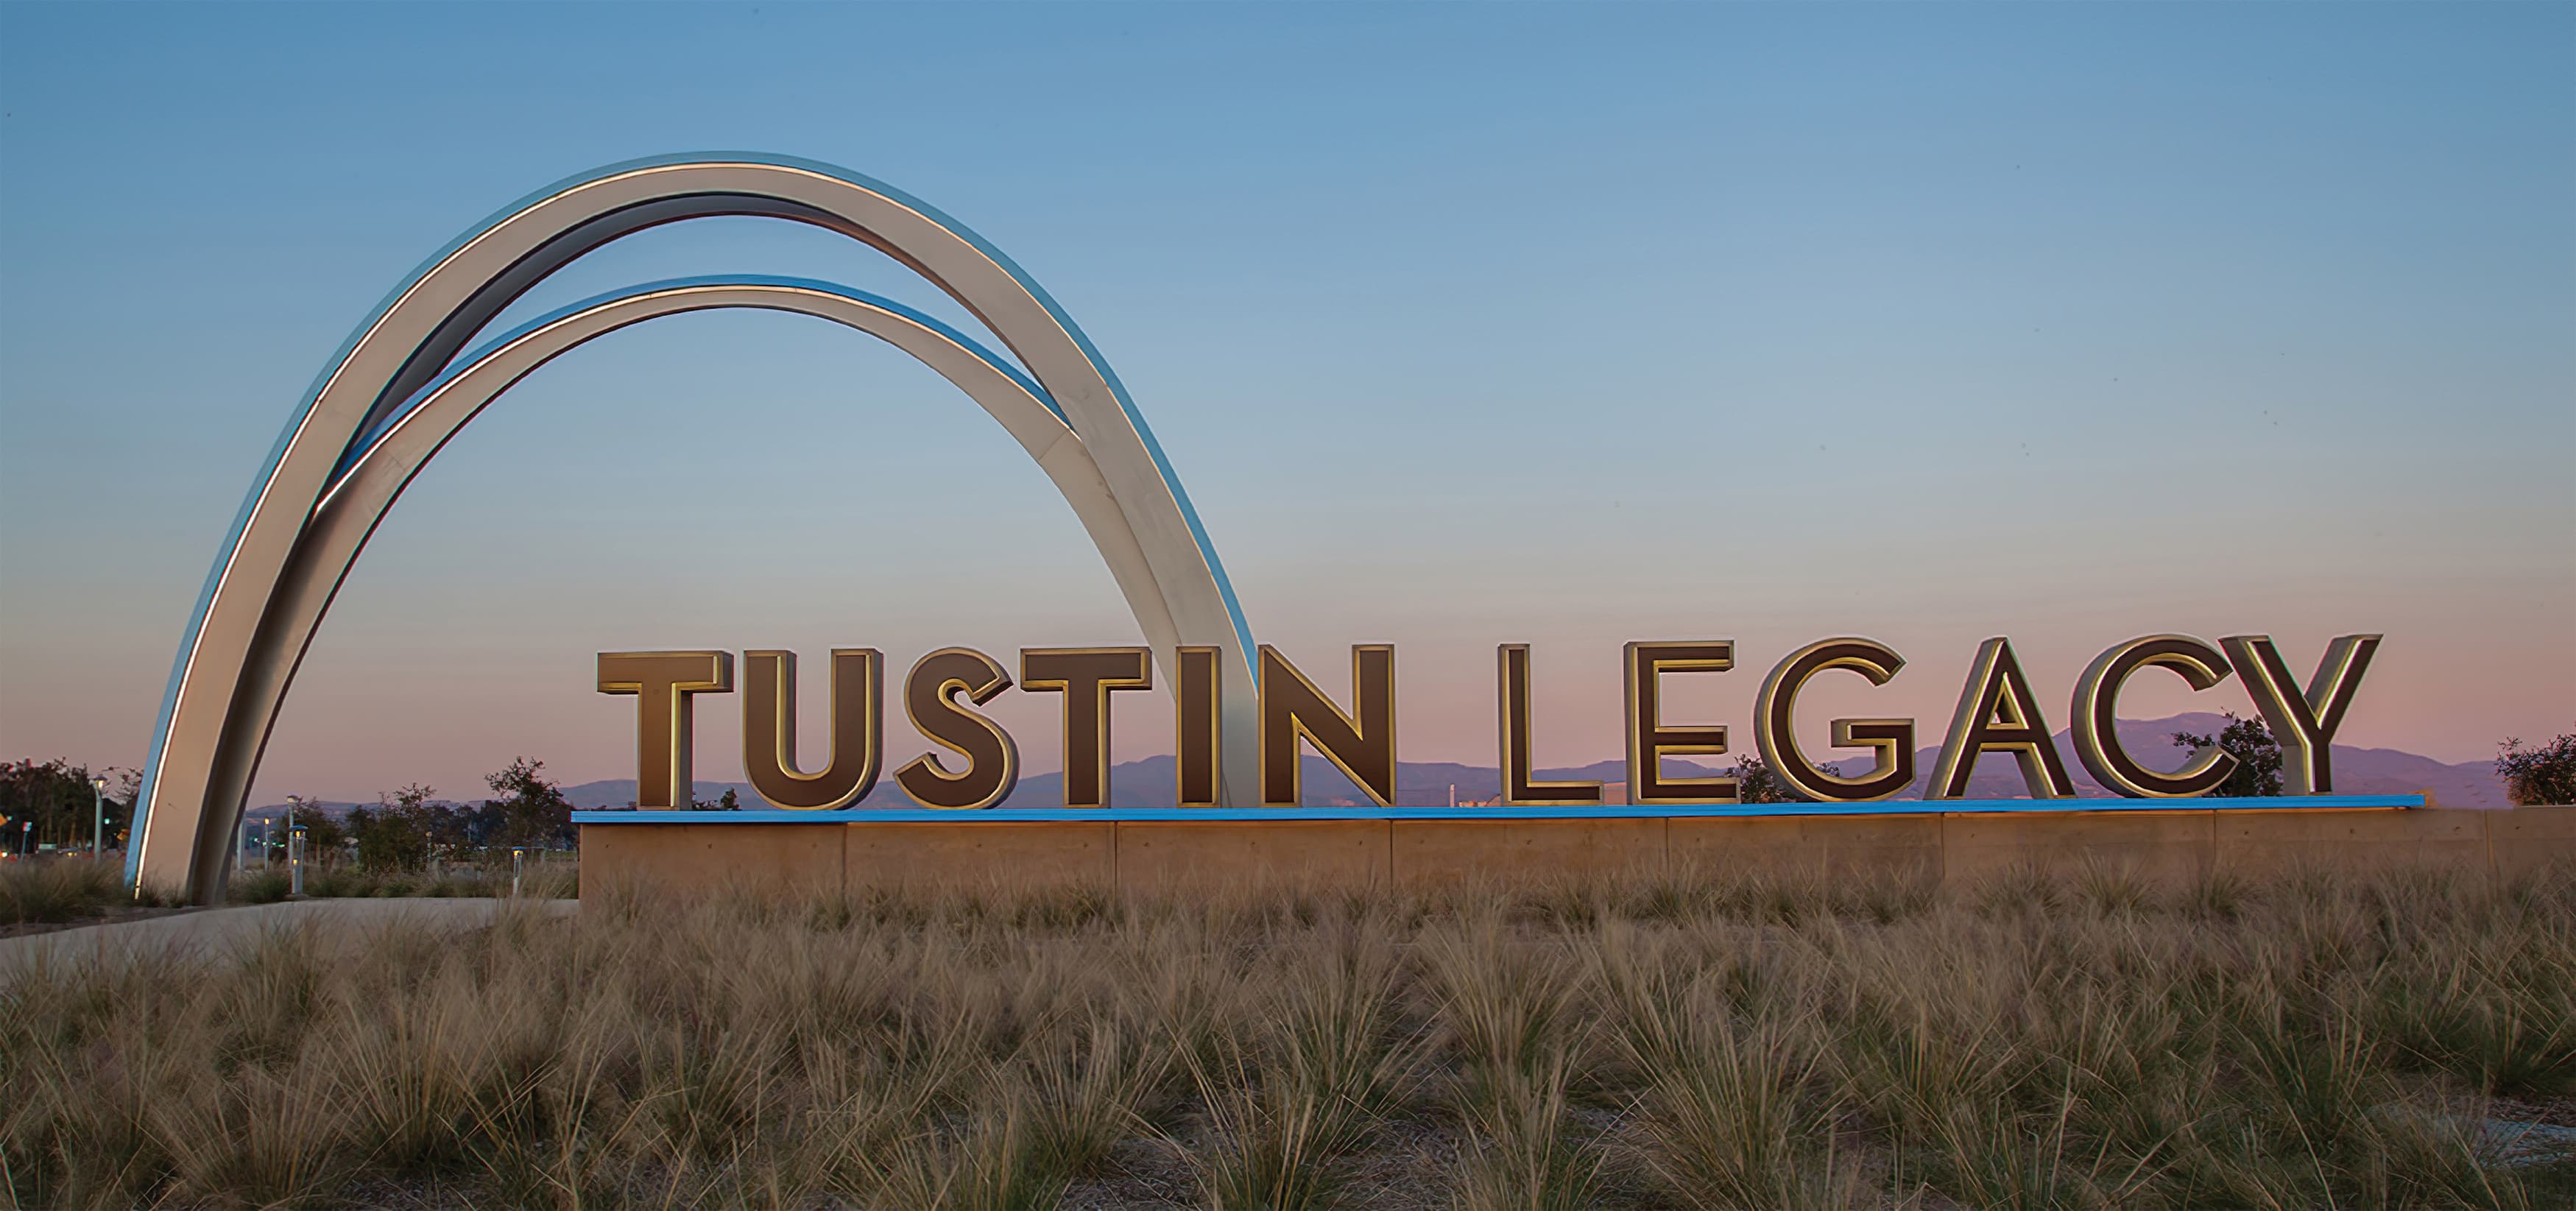 The Tustin Legacy archway serves as a landmark for the city of Tustin, illustrating the landmark element discussed in our explanation of what wayfinding is